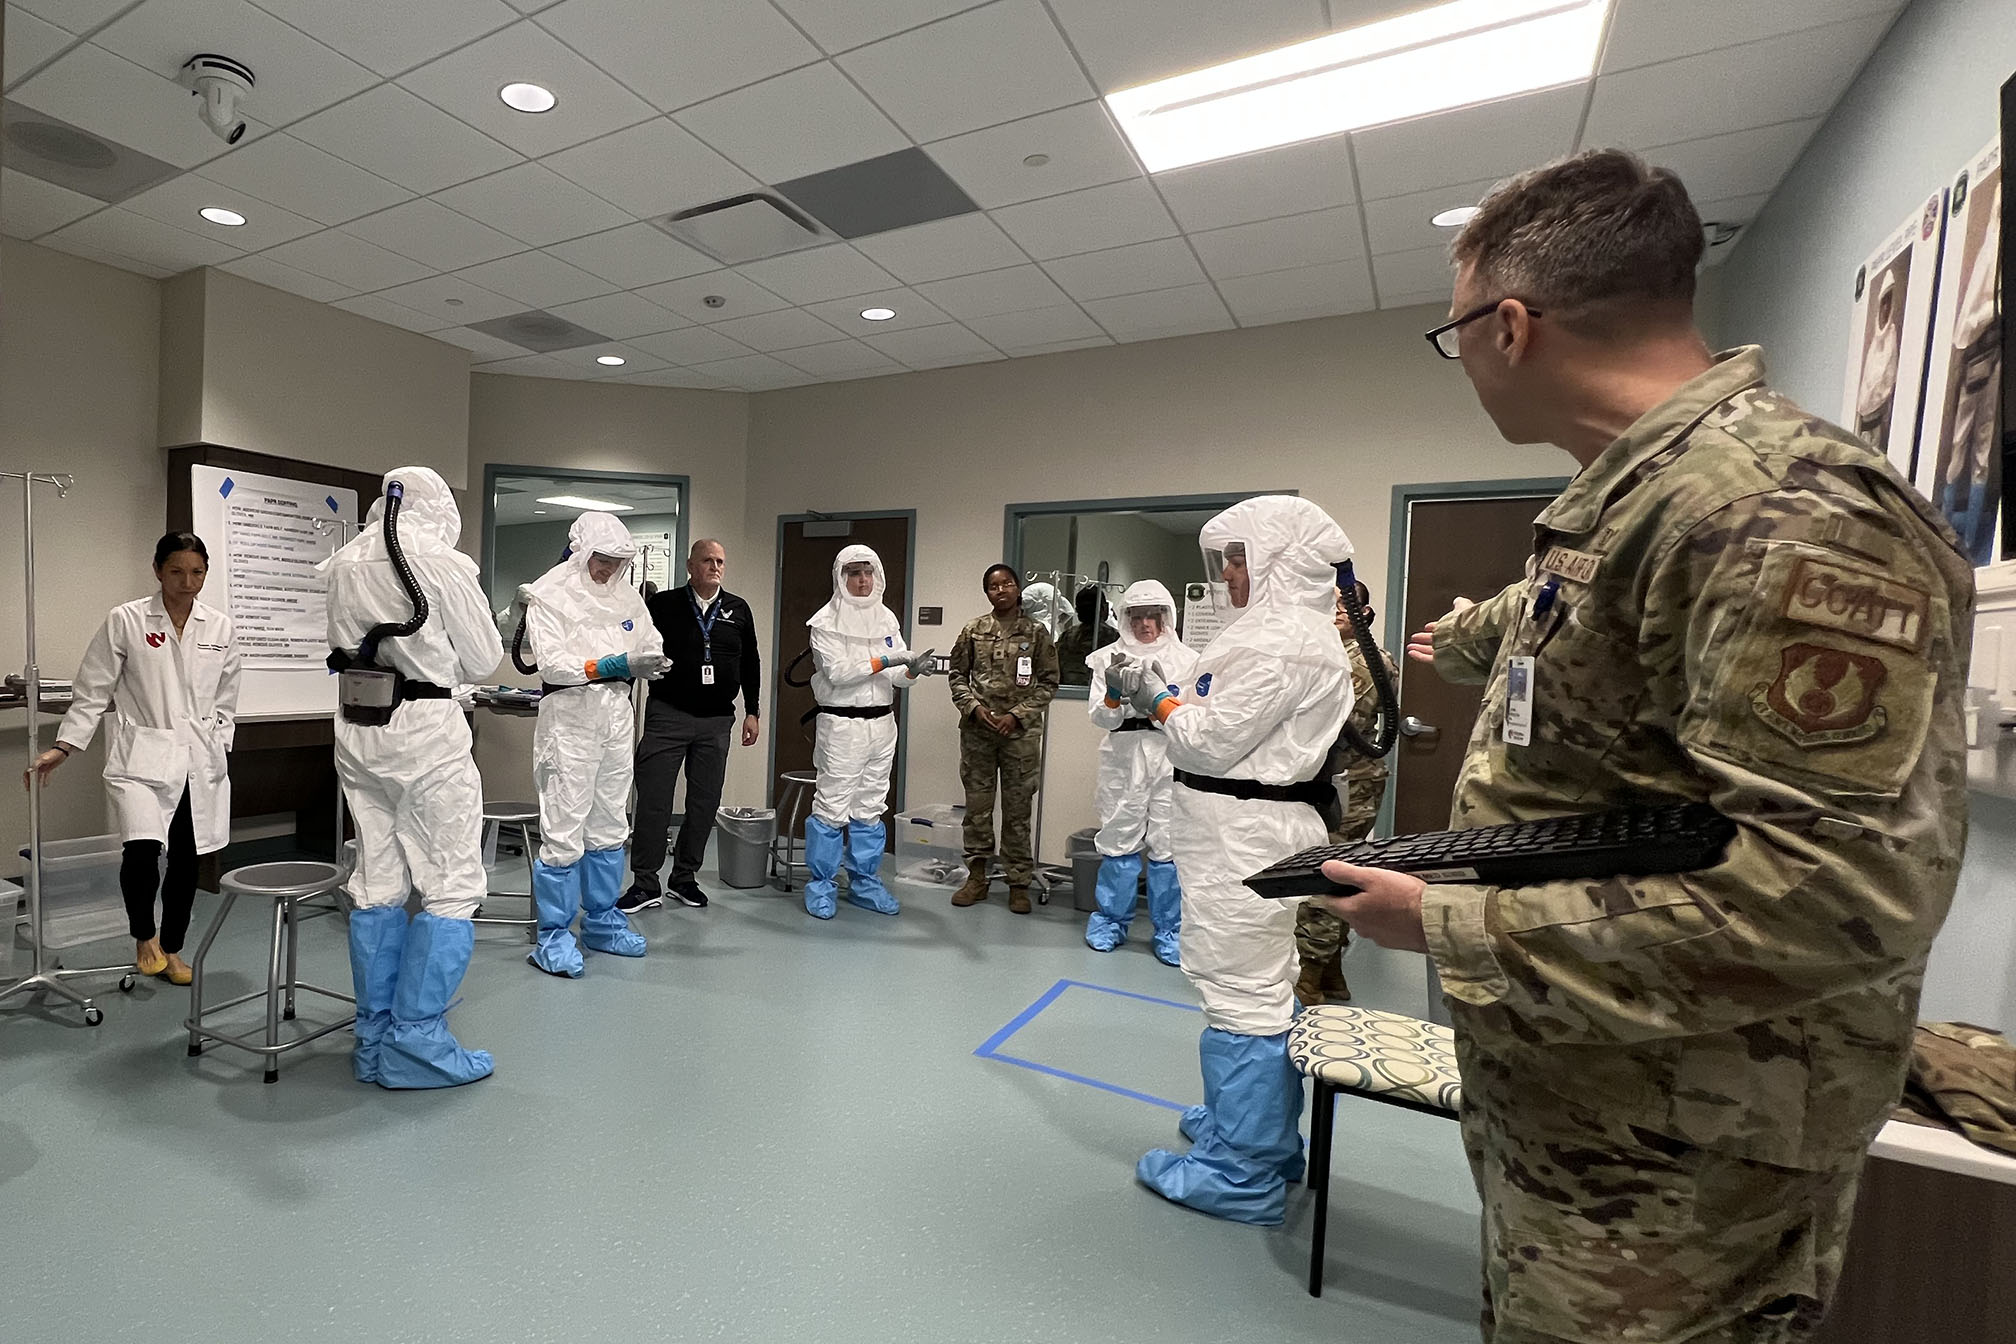 Staff members from the Center for Sustainment of Trauma and Readiness Skills&comma; or C-STARS&comma; led congressional staffers through an exercise donning and doffing personal protective equipment during a tour of the Davis Global Center&period;